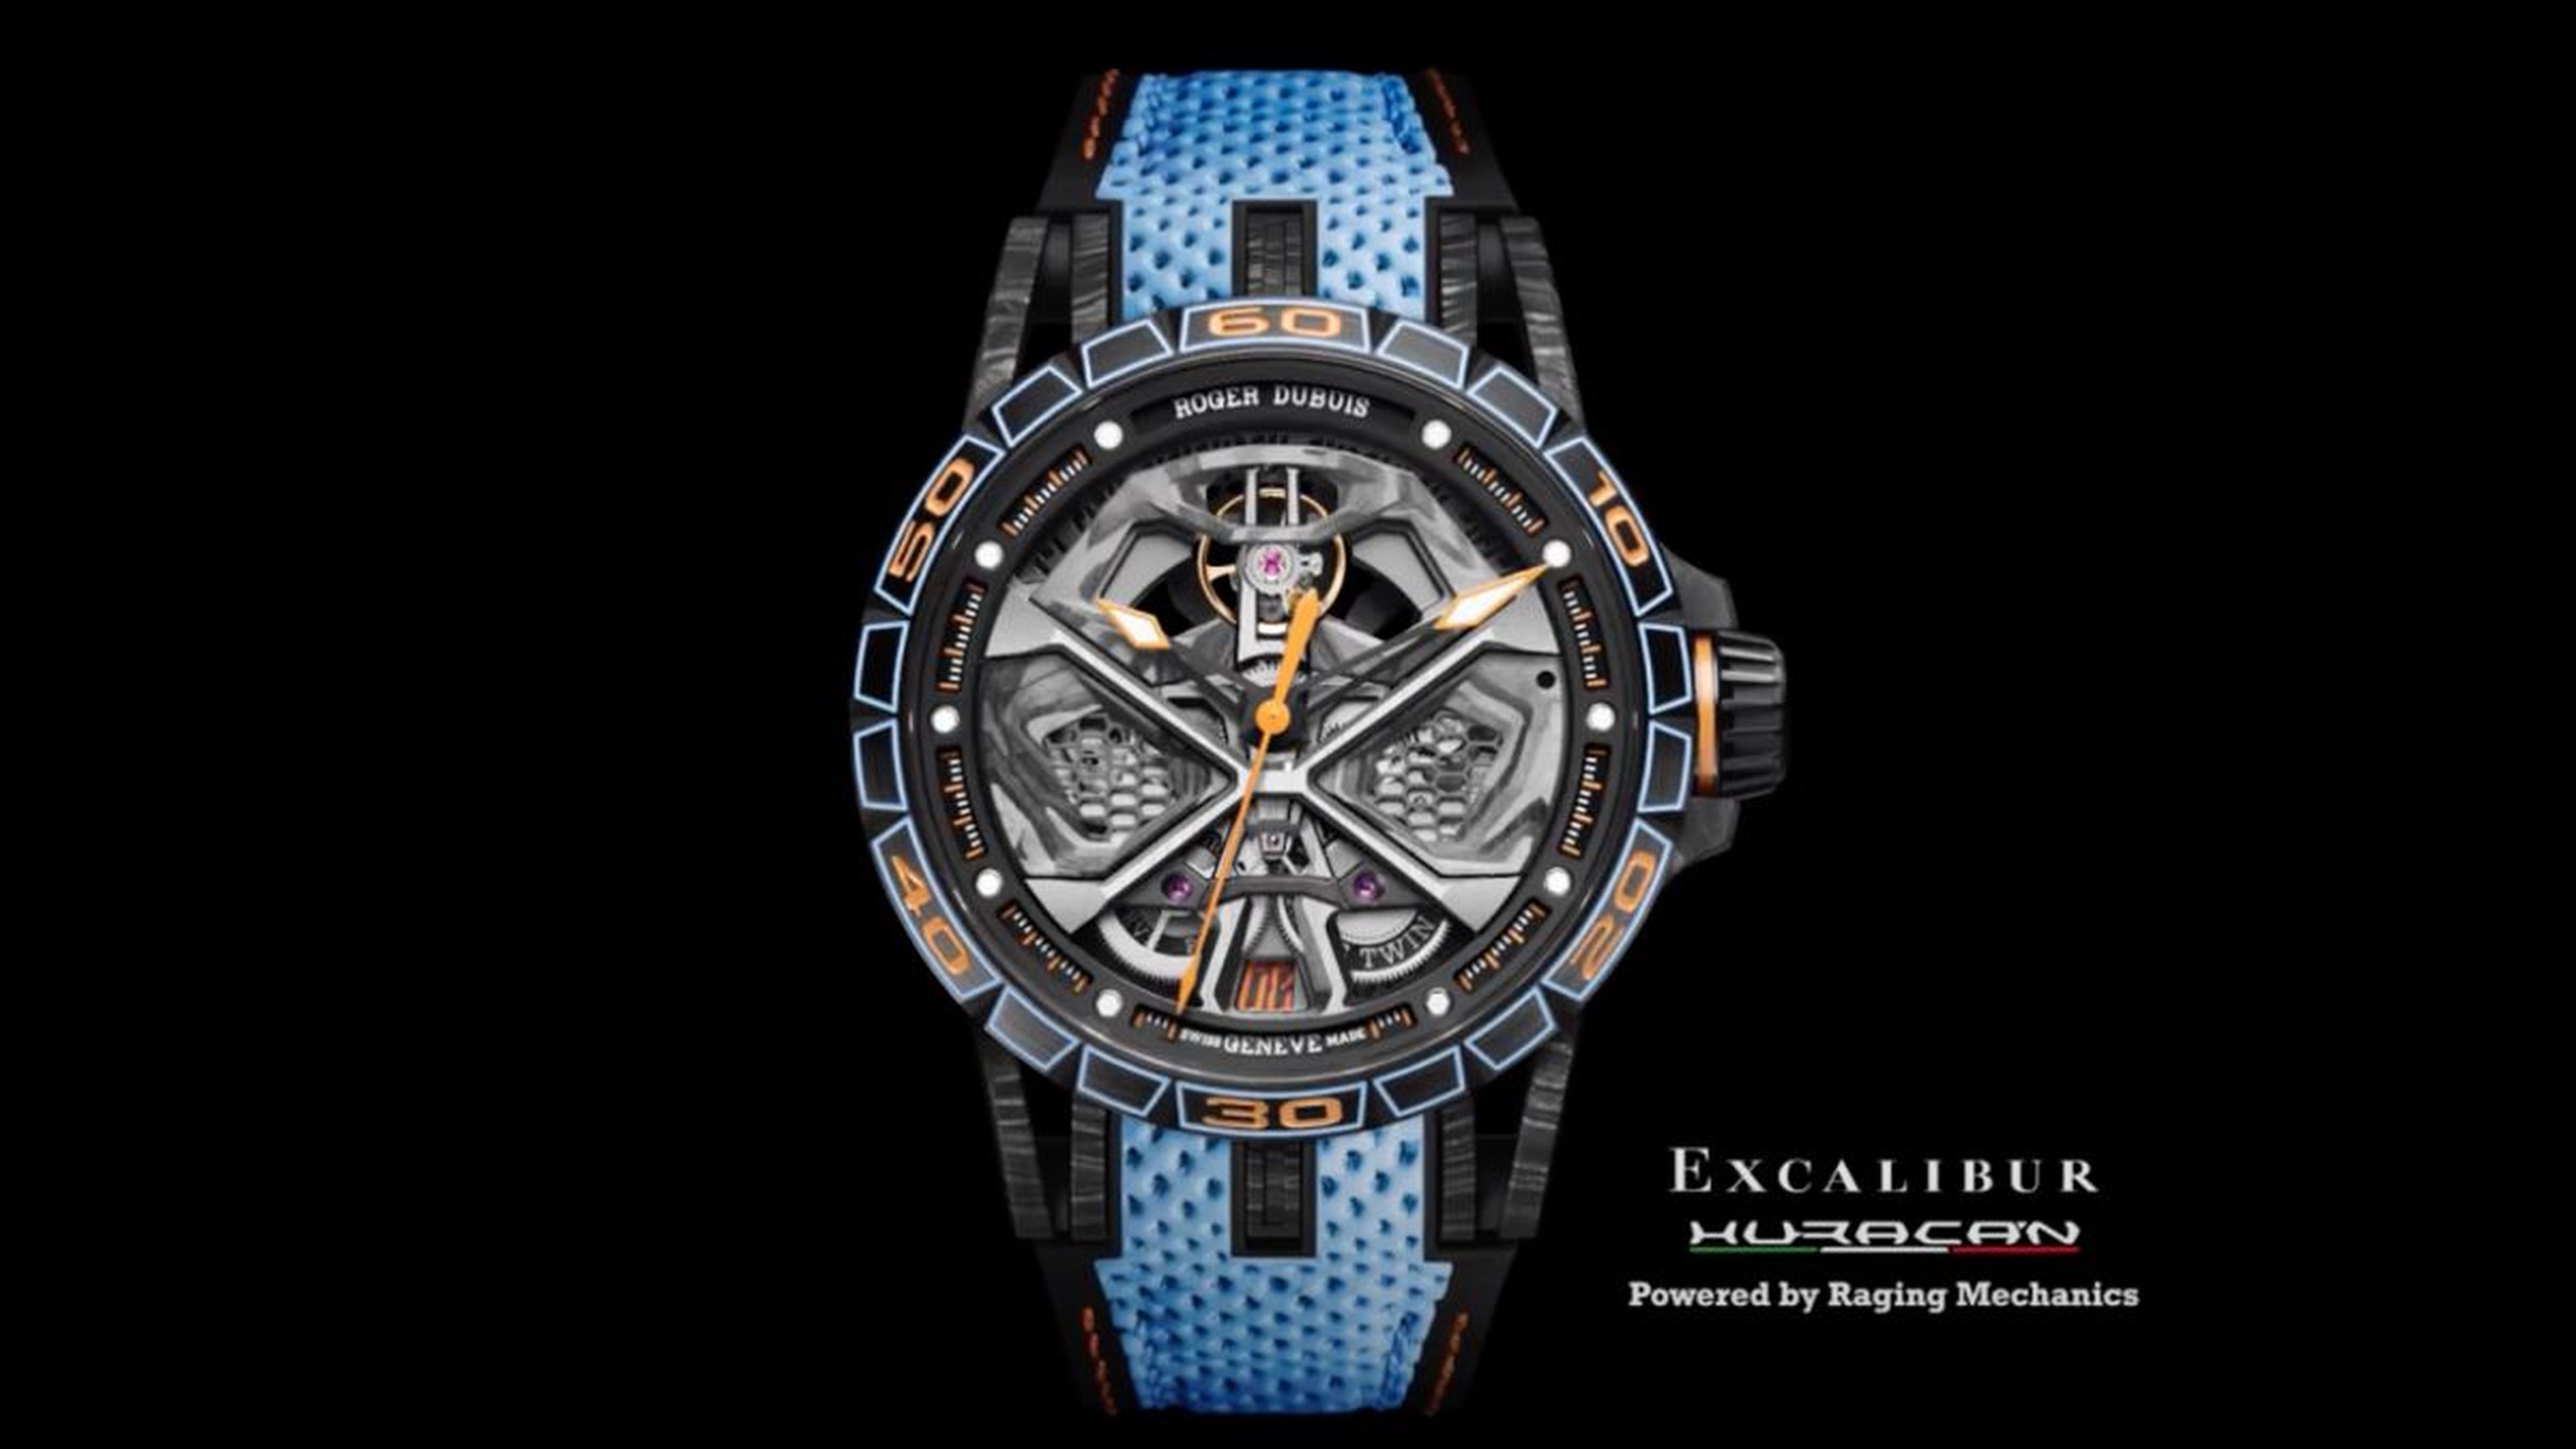 Roger Dubuis Excalibur Spider Huracan STO